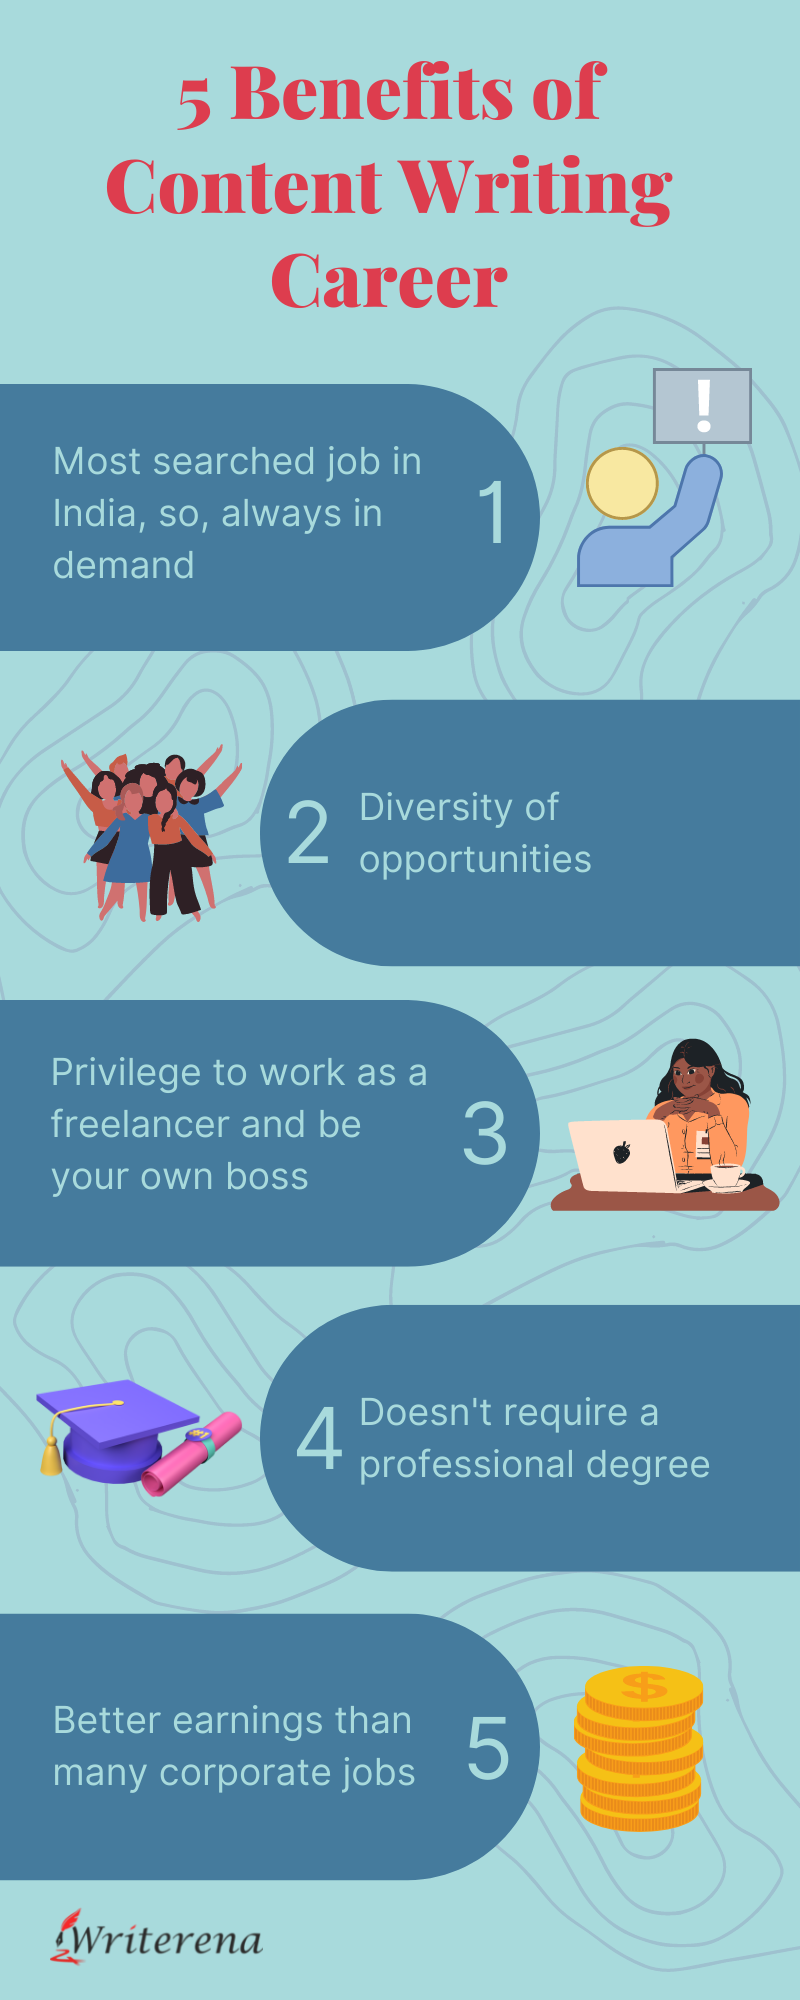 infographic-benefits-of-content-writing-career